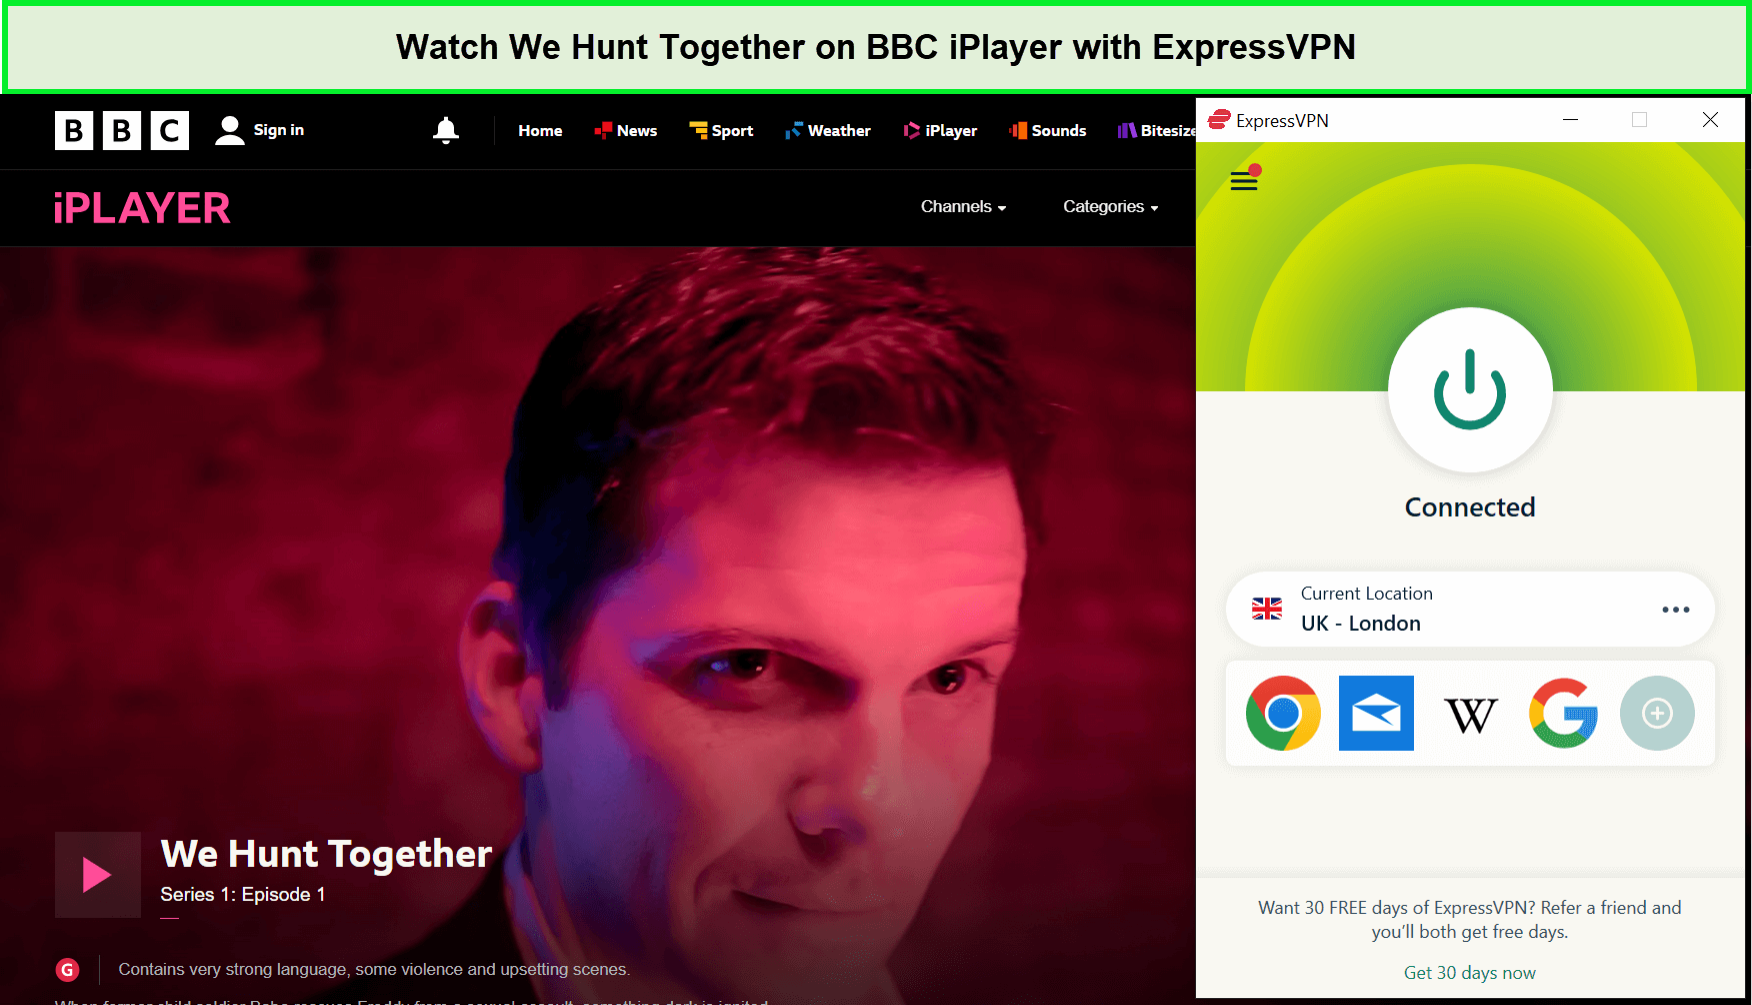 Watch-We-Hunt-Together-outside-UK-on-BBC-iPlayer-with-ExpressVPN